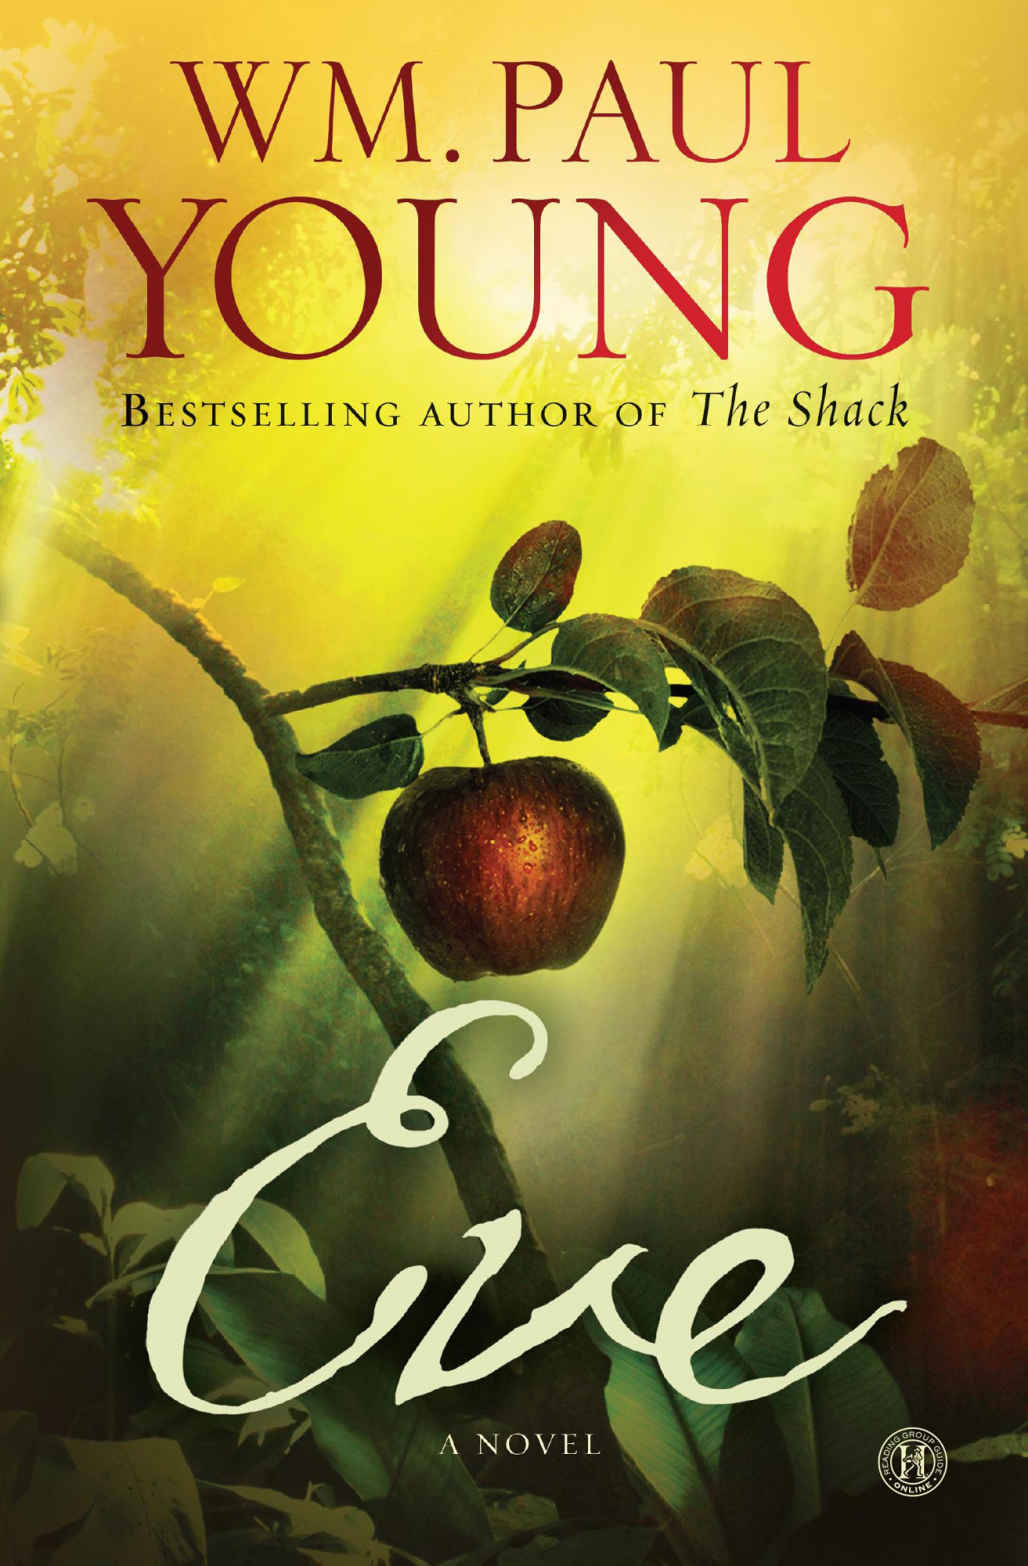 Eve: A Novel by Wm. Paul Young